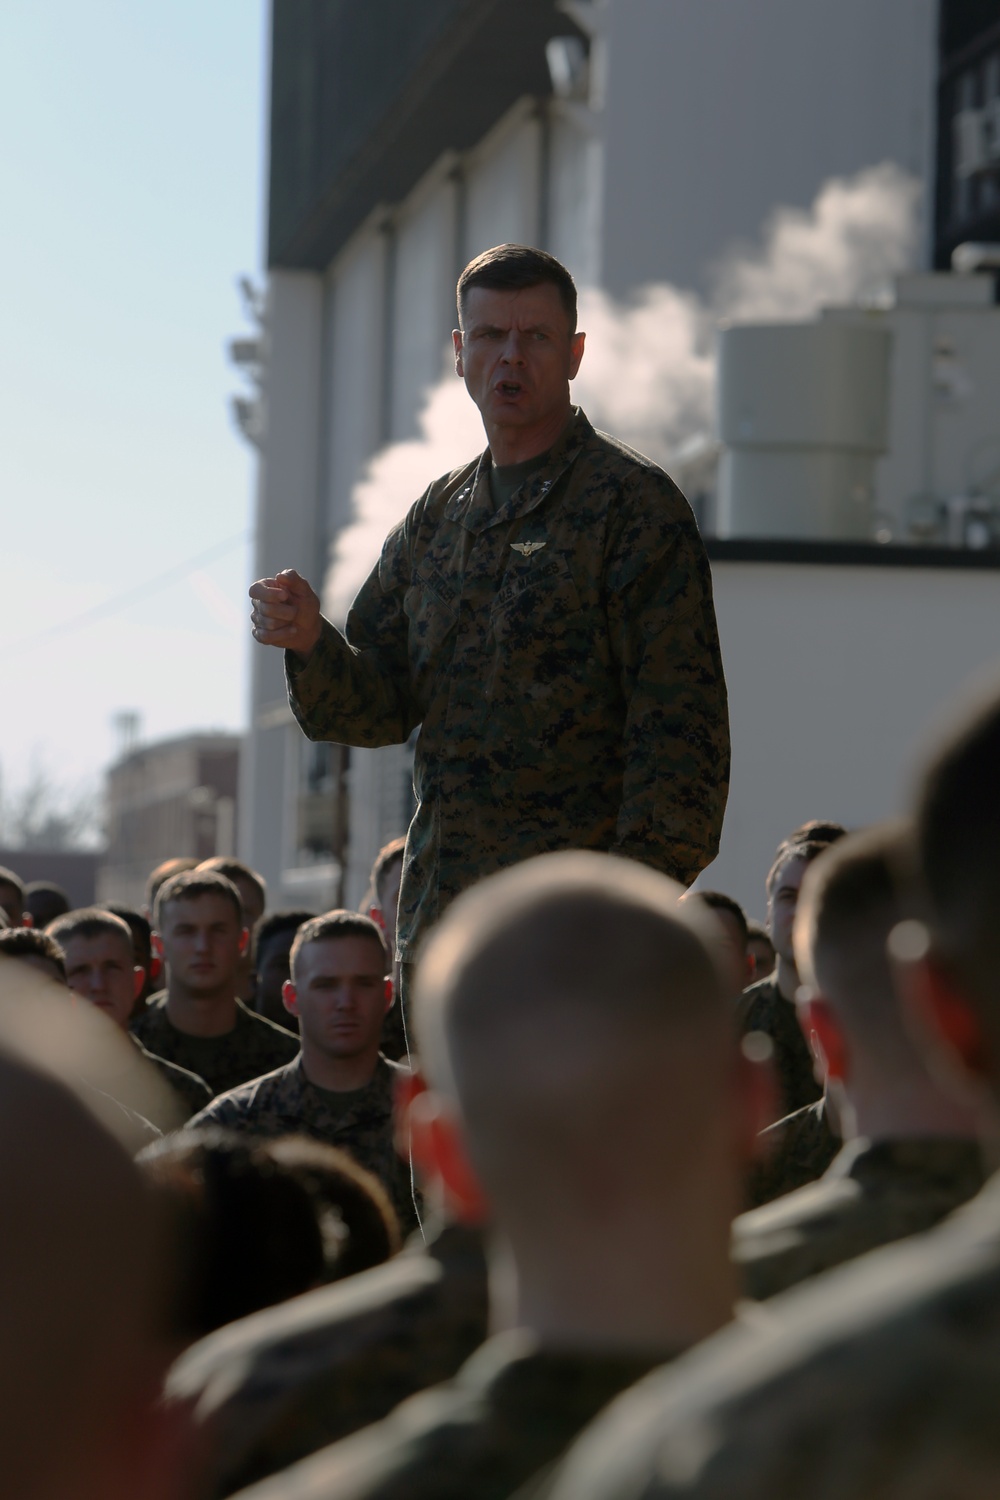 MEF commander visits Cherry Point, emphasizes readiness, standards, values